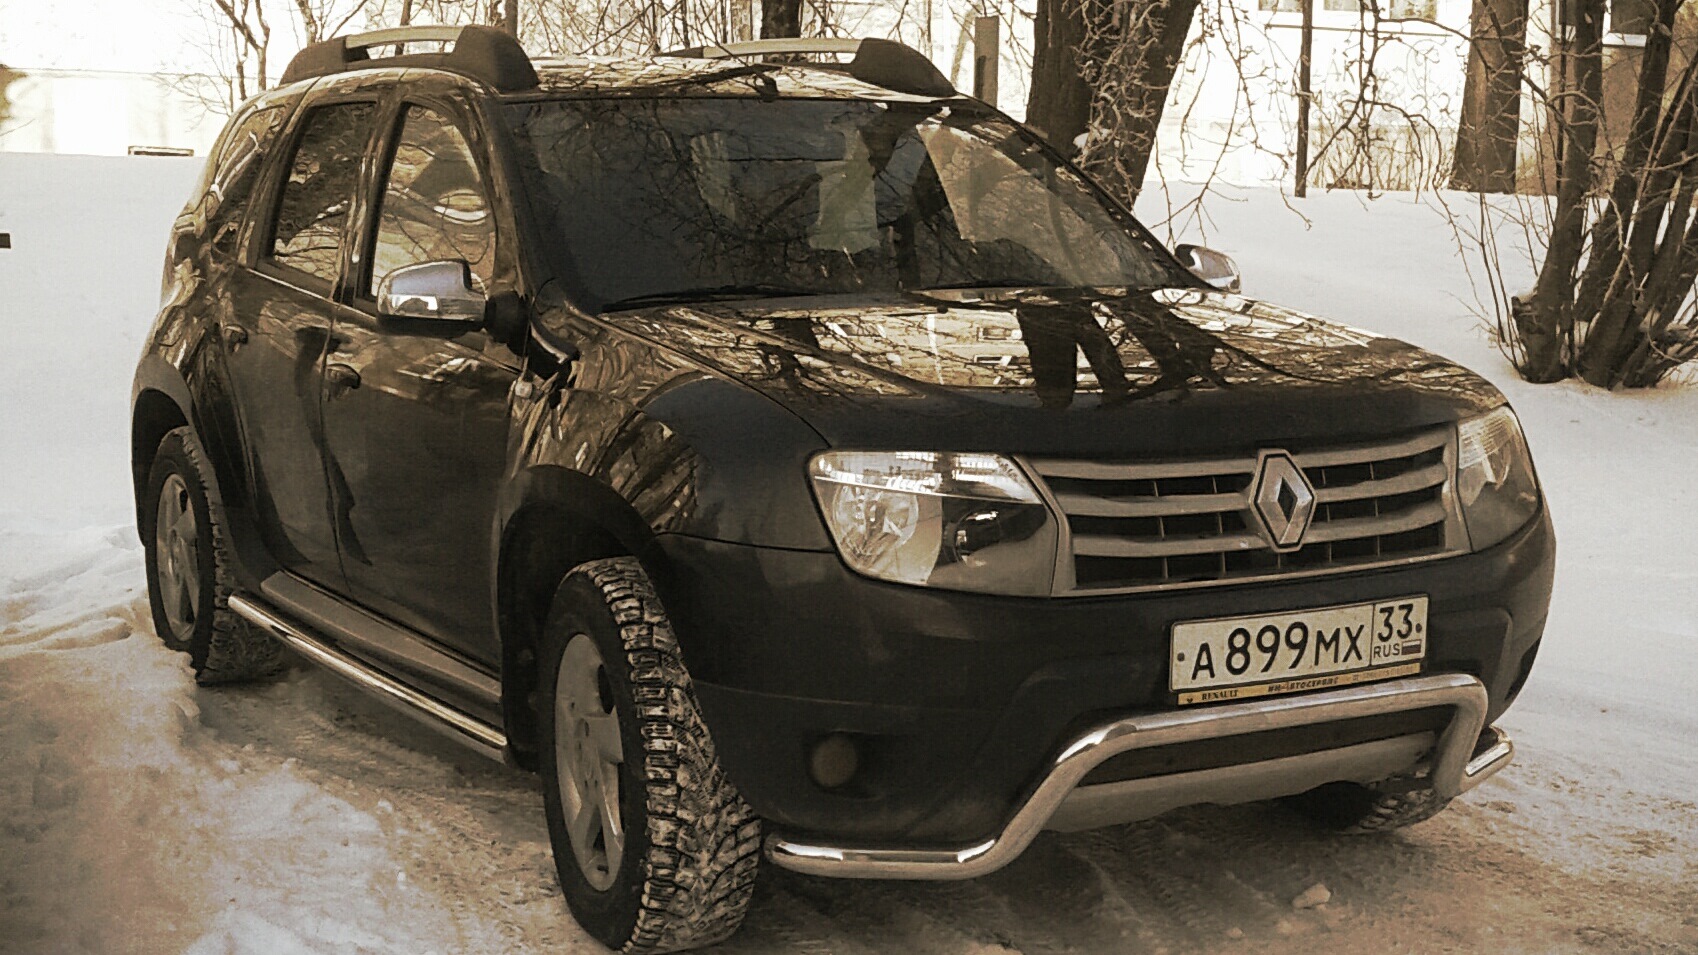 Дастер 4wd 2.0. Renault Duster 2013. Рено Дастер 2013. Рено Дастер 4х4 2013. Рено Дастер 2013 года.